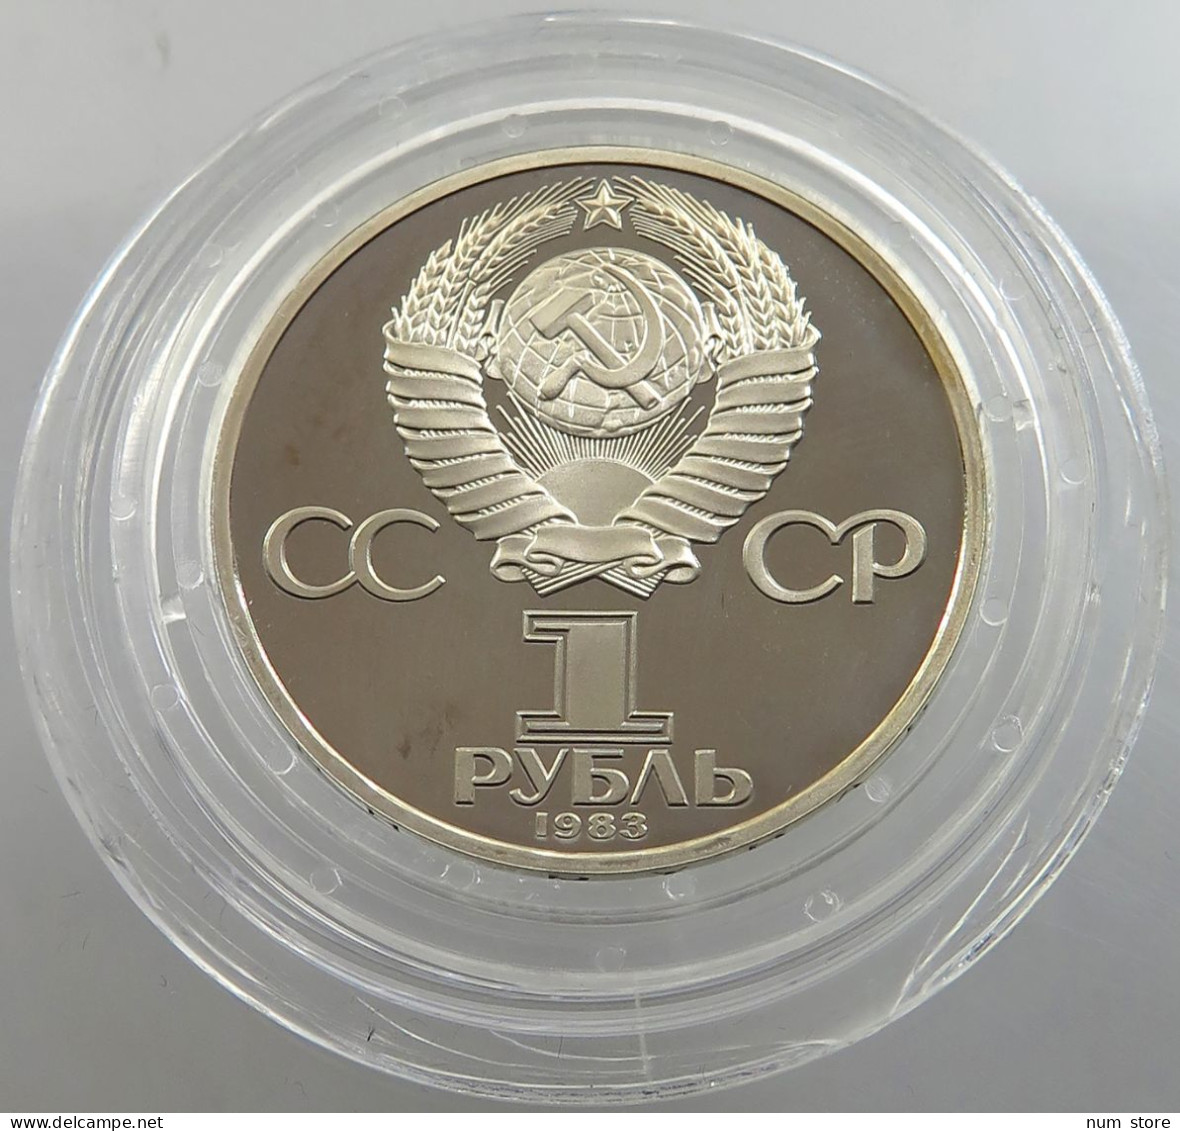 RUSSIA USSR 1 ROUBLE 1983 WITHOUT 1988 ON EDGE MARX PROOF #sm14 0335 - Russie